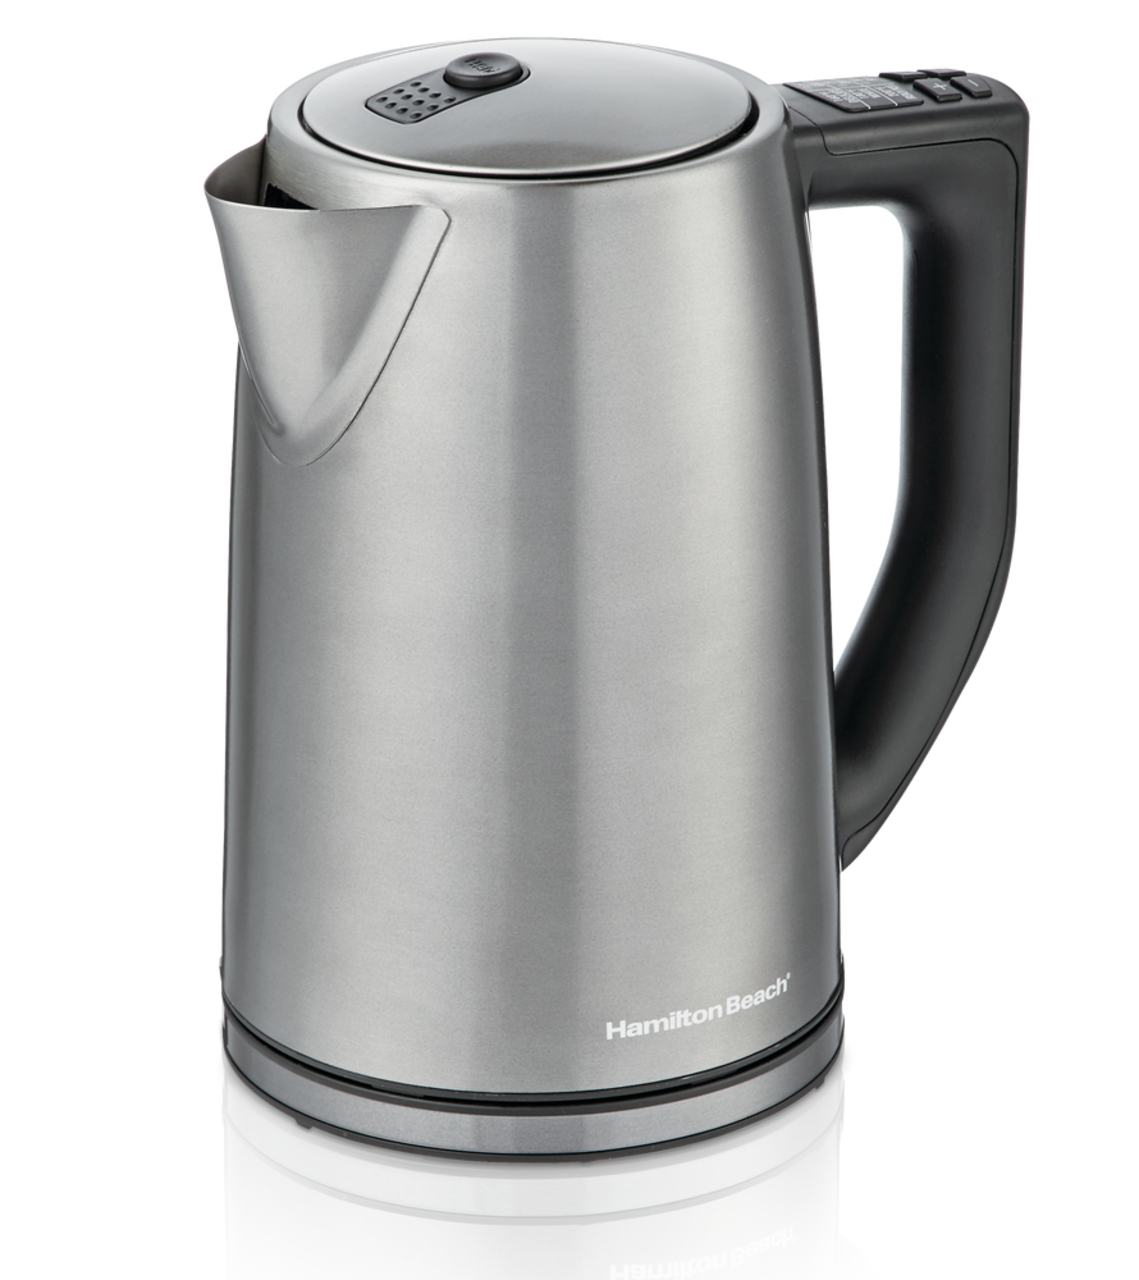 https://media-www.canadiantire.ca/product/living/kitchen/kitchen-appliances/0437314/hamilton-beach-elite-1-7l-kettle--4afca8f9-cc0a-4b16-bcf5-1679c782ed4a.png?imdensity=1&imwidth=640&impolicy=mZoom